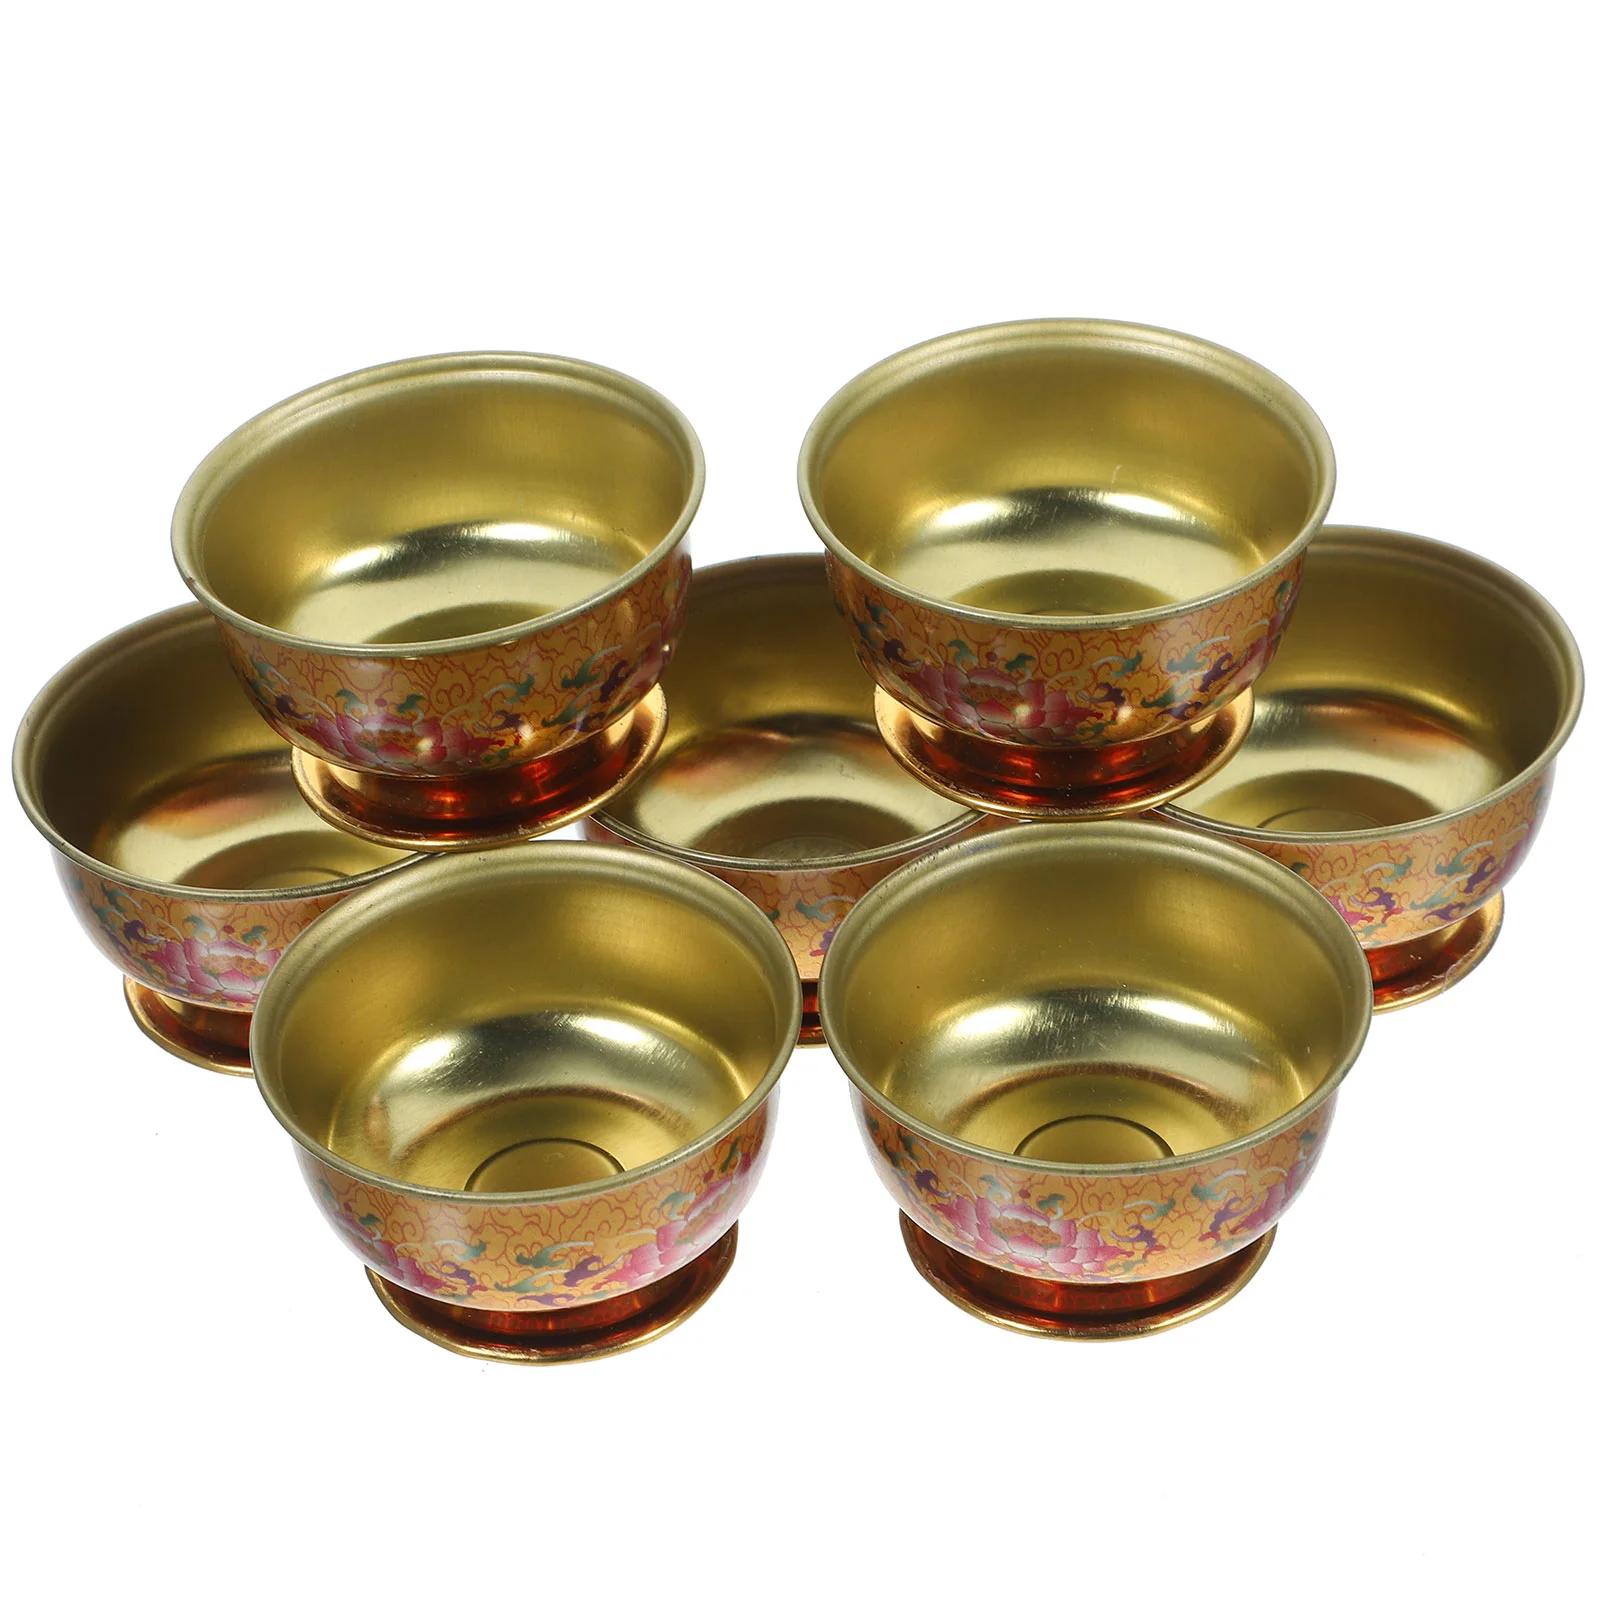 

7 Pcs Water Bowl Worship Cup Vintage Decor Offering Lotus Flower Holder Tabletop Buddhism Altar Supplies Supply